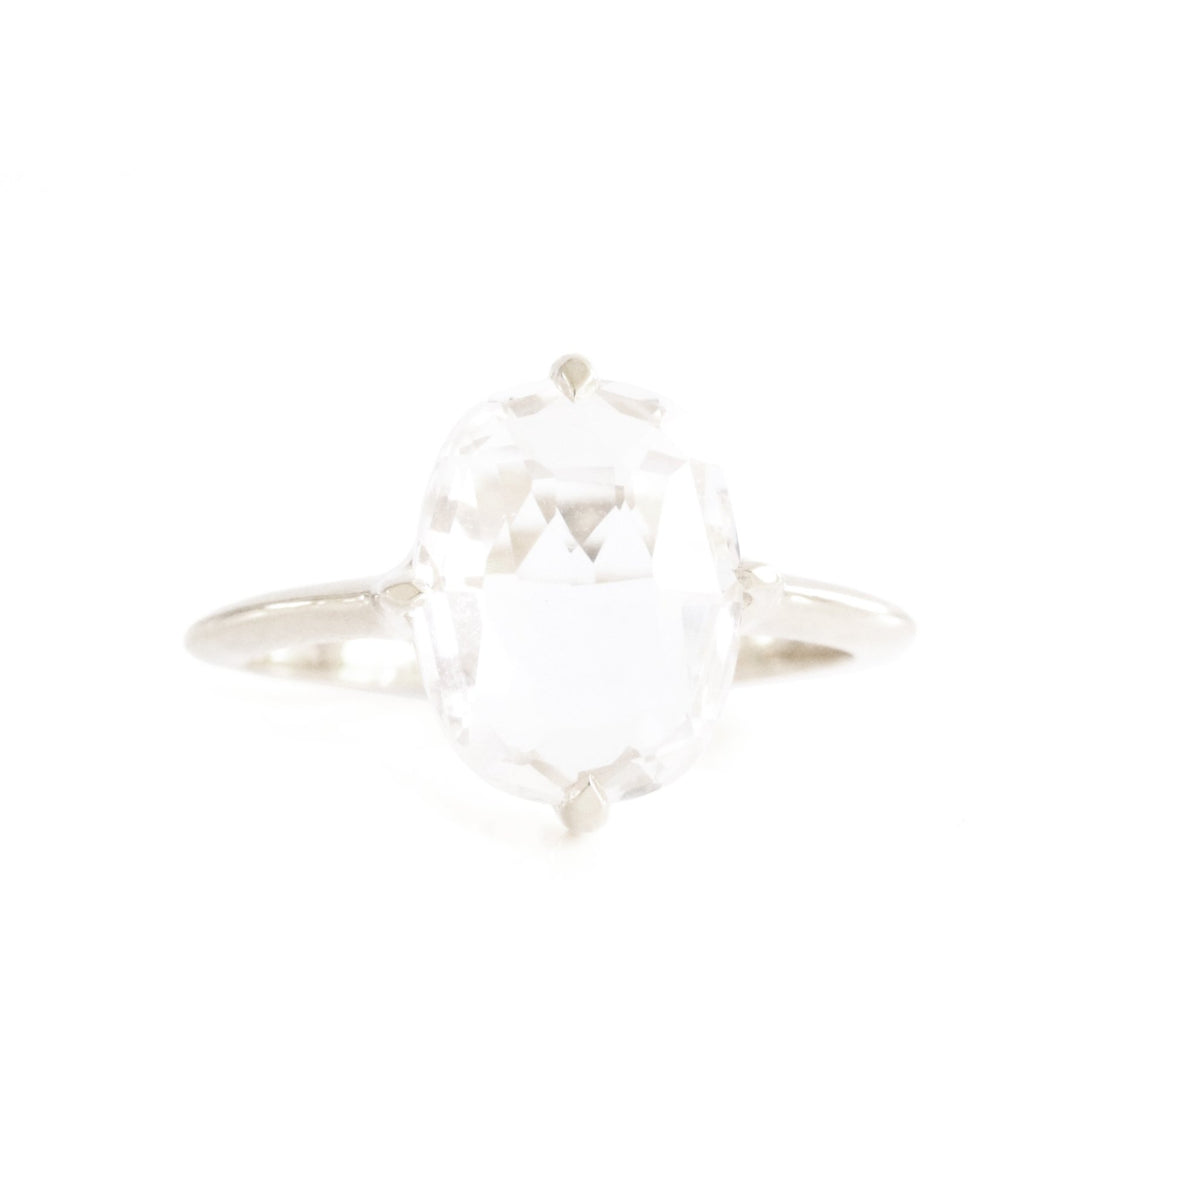 KIND OVAL SOLITAIRE RING - WHITE TOPAZ &amp; SILVER - SO PRETTY CARA COTTER